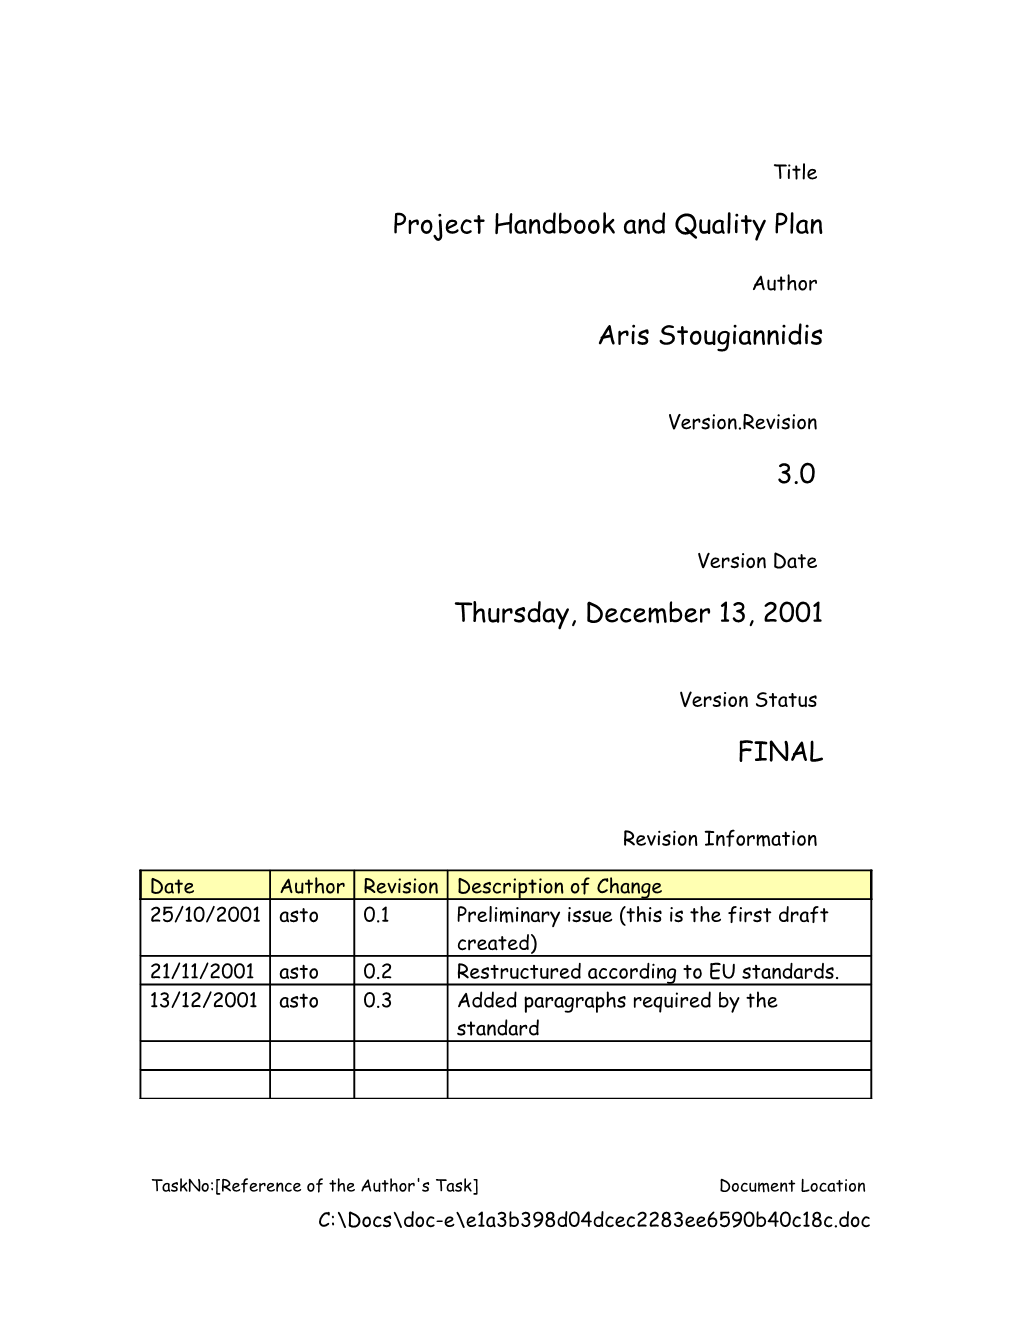 Project Handbook and Quality Plan